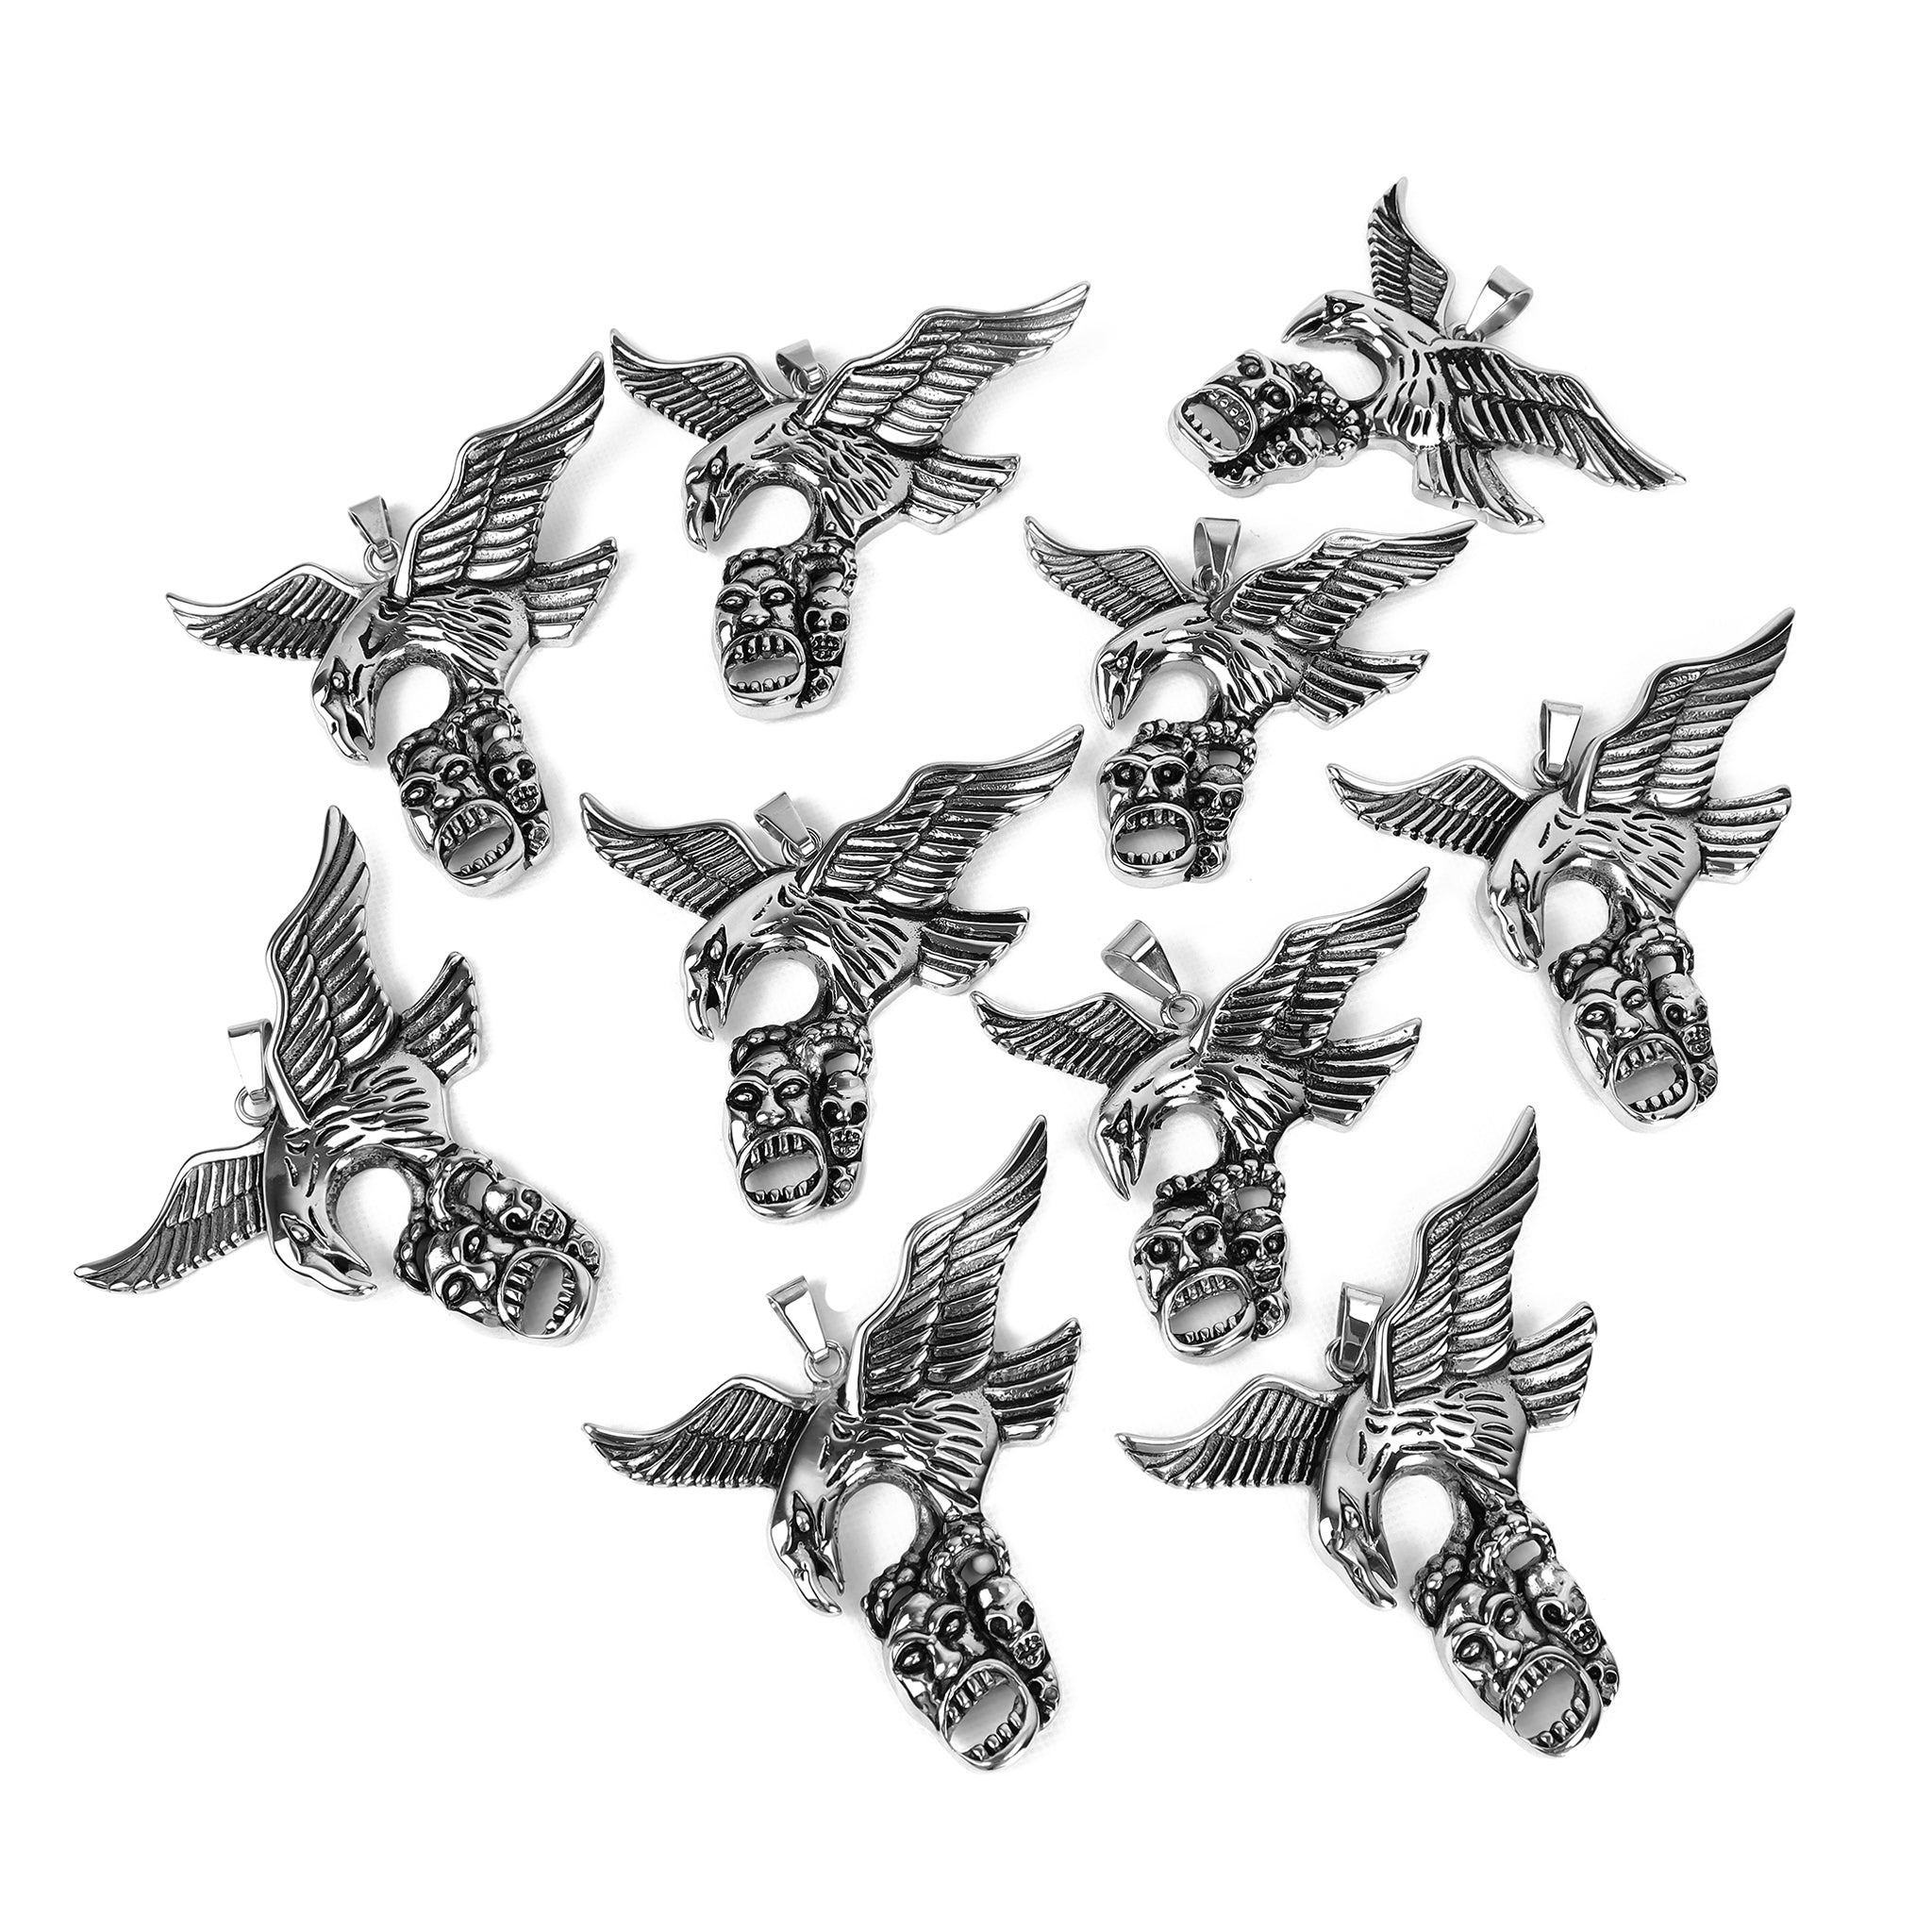 10 Pack - Eagle Stainless Steel Pendant / PDC267